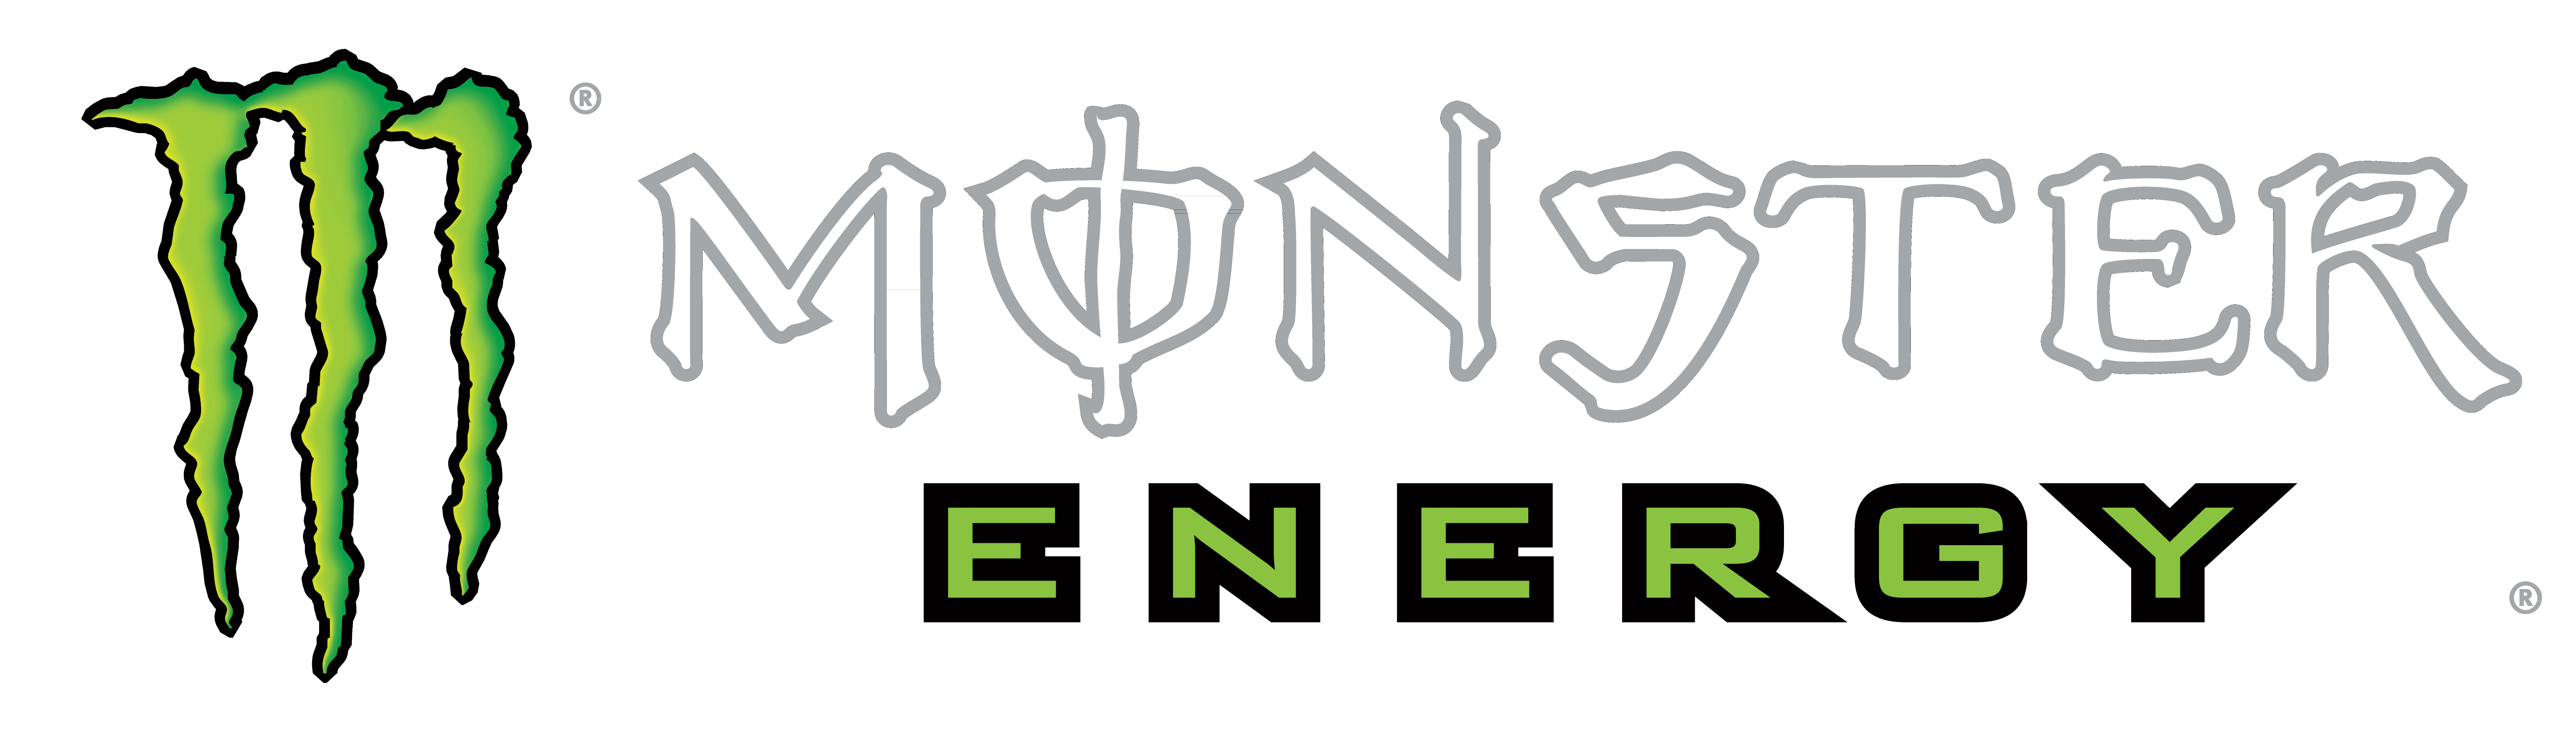 Monster png free transparent. Energy clipart logo